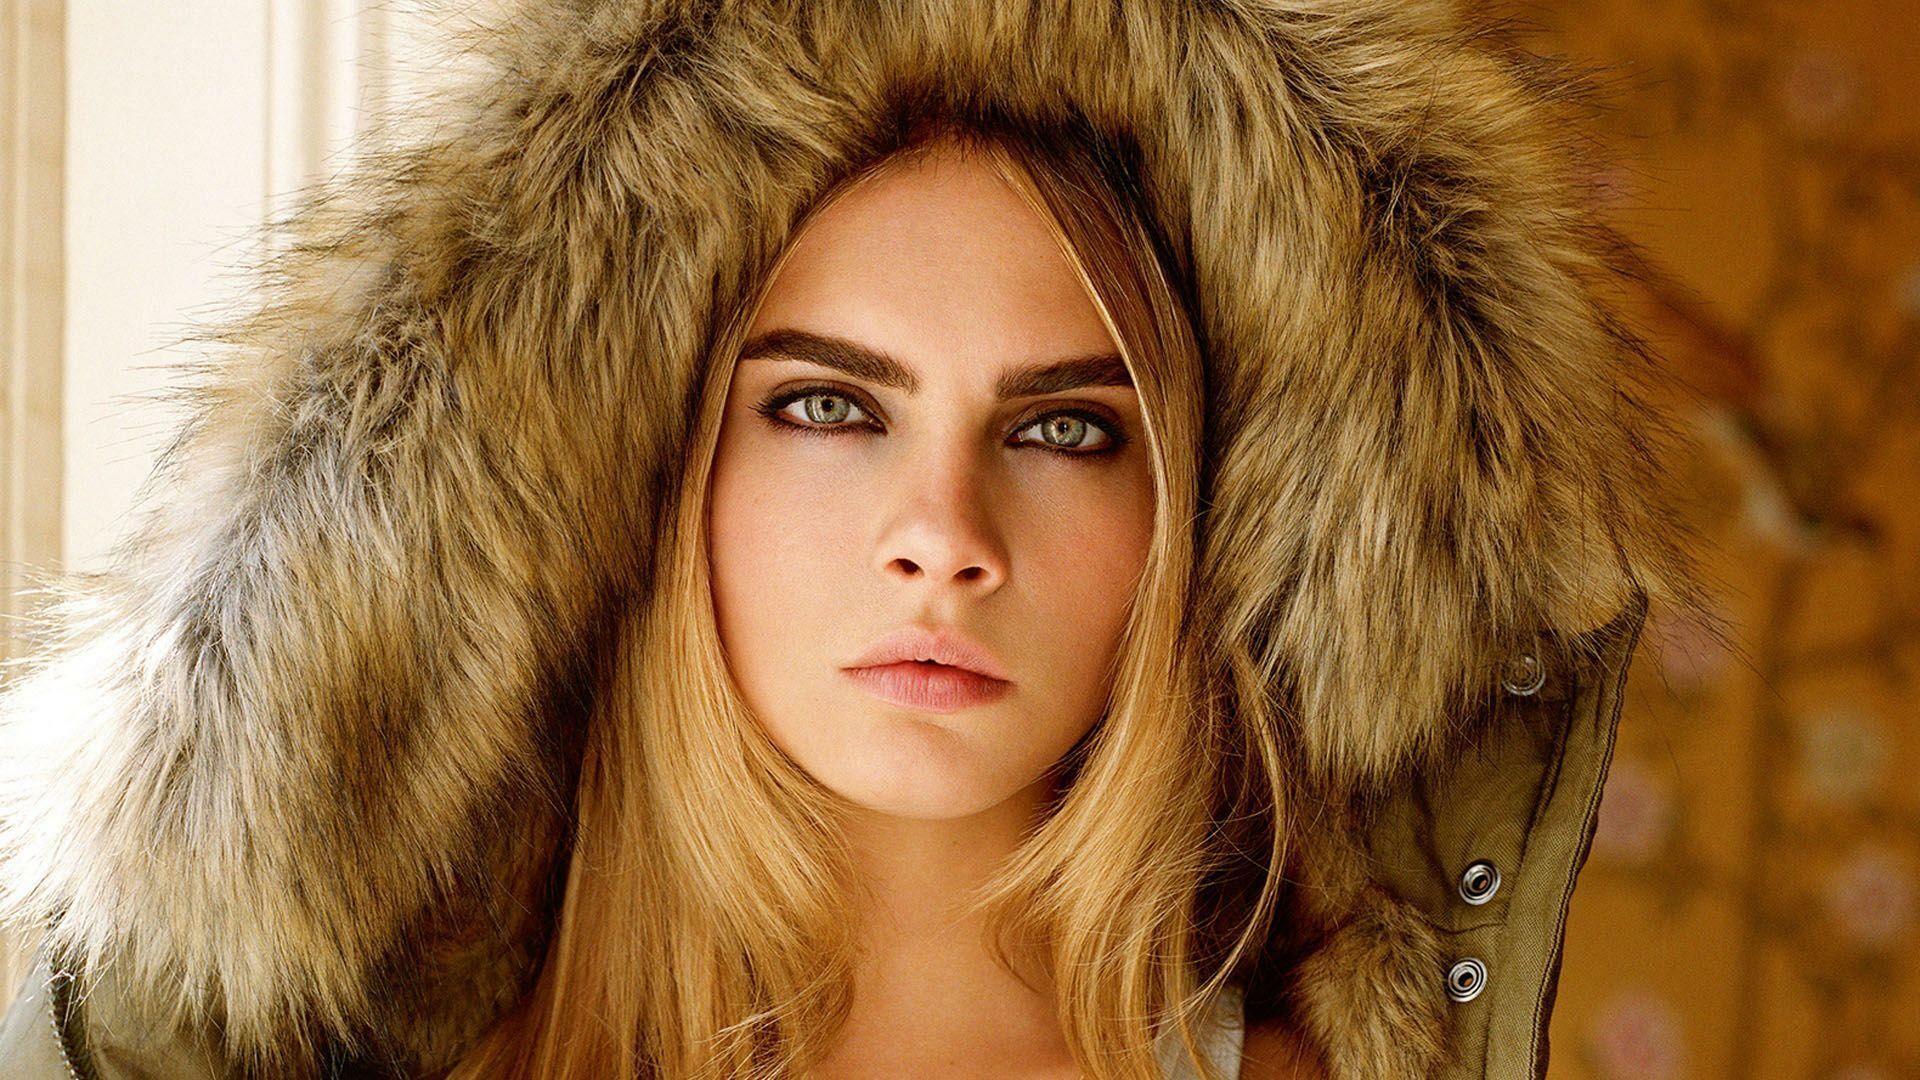 Cara Delevingne: Made her big screen debut in a non-speaking role with Joe Wright's Anna Karenina. 1920x1080 Full HD Wallpaper.